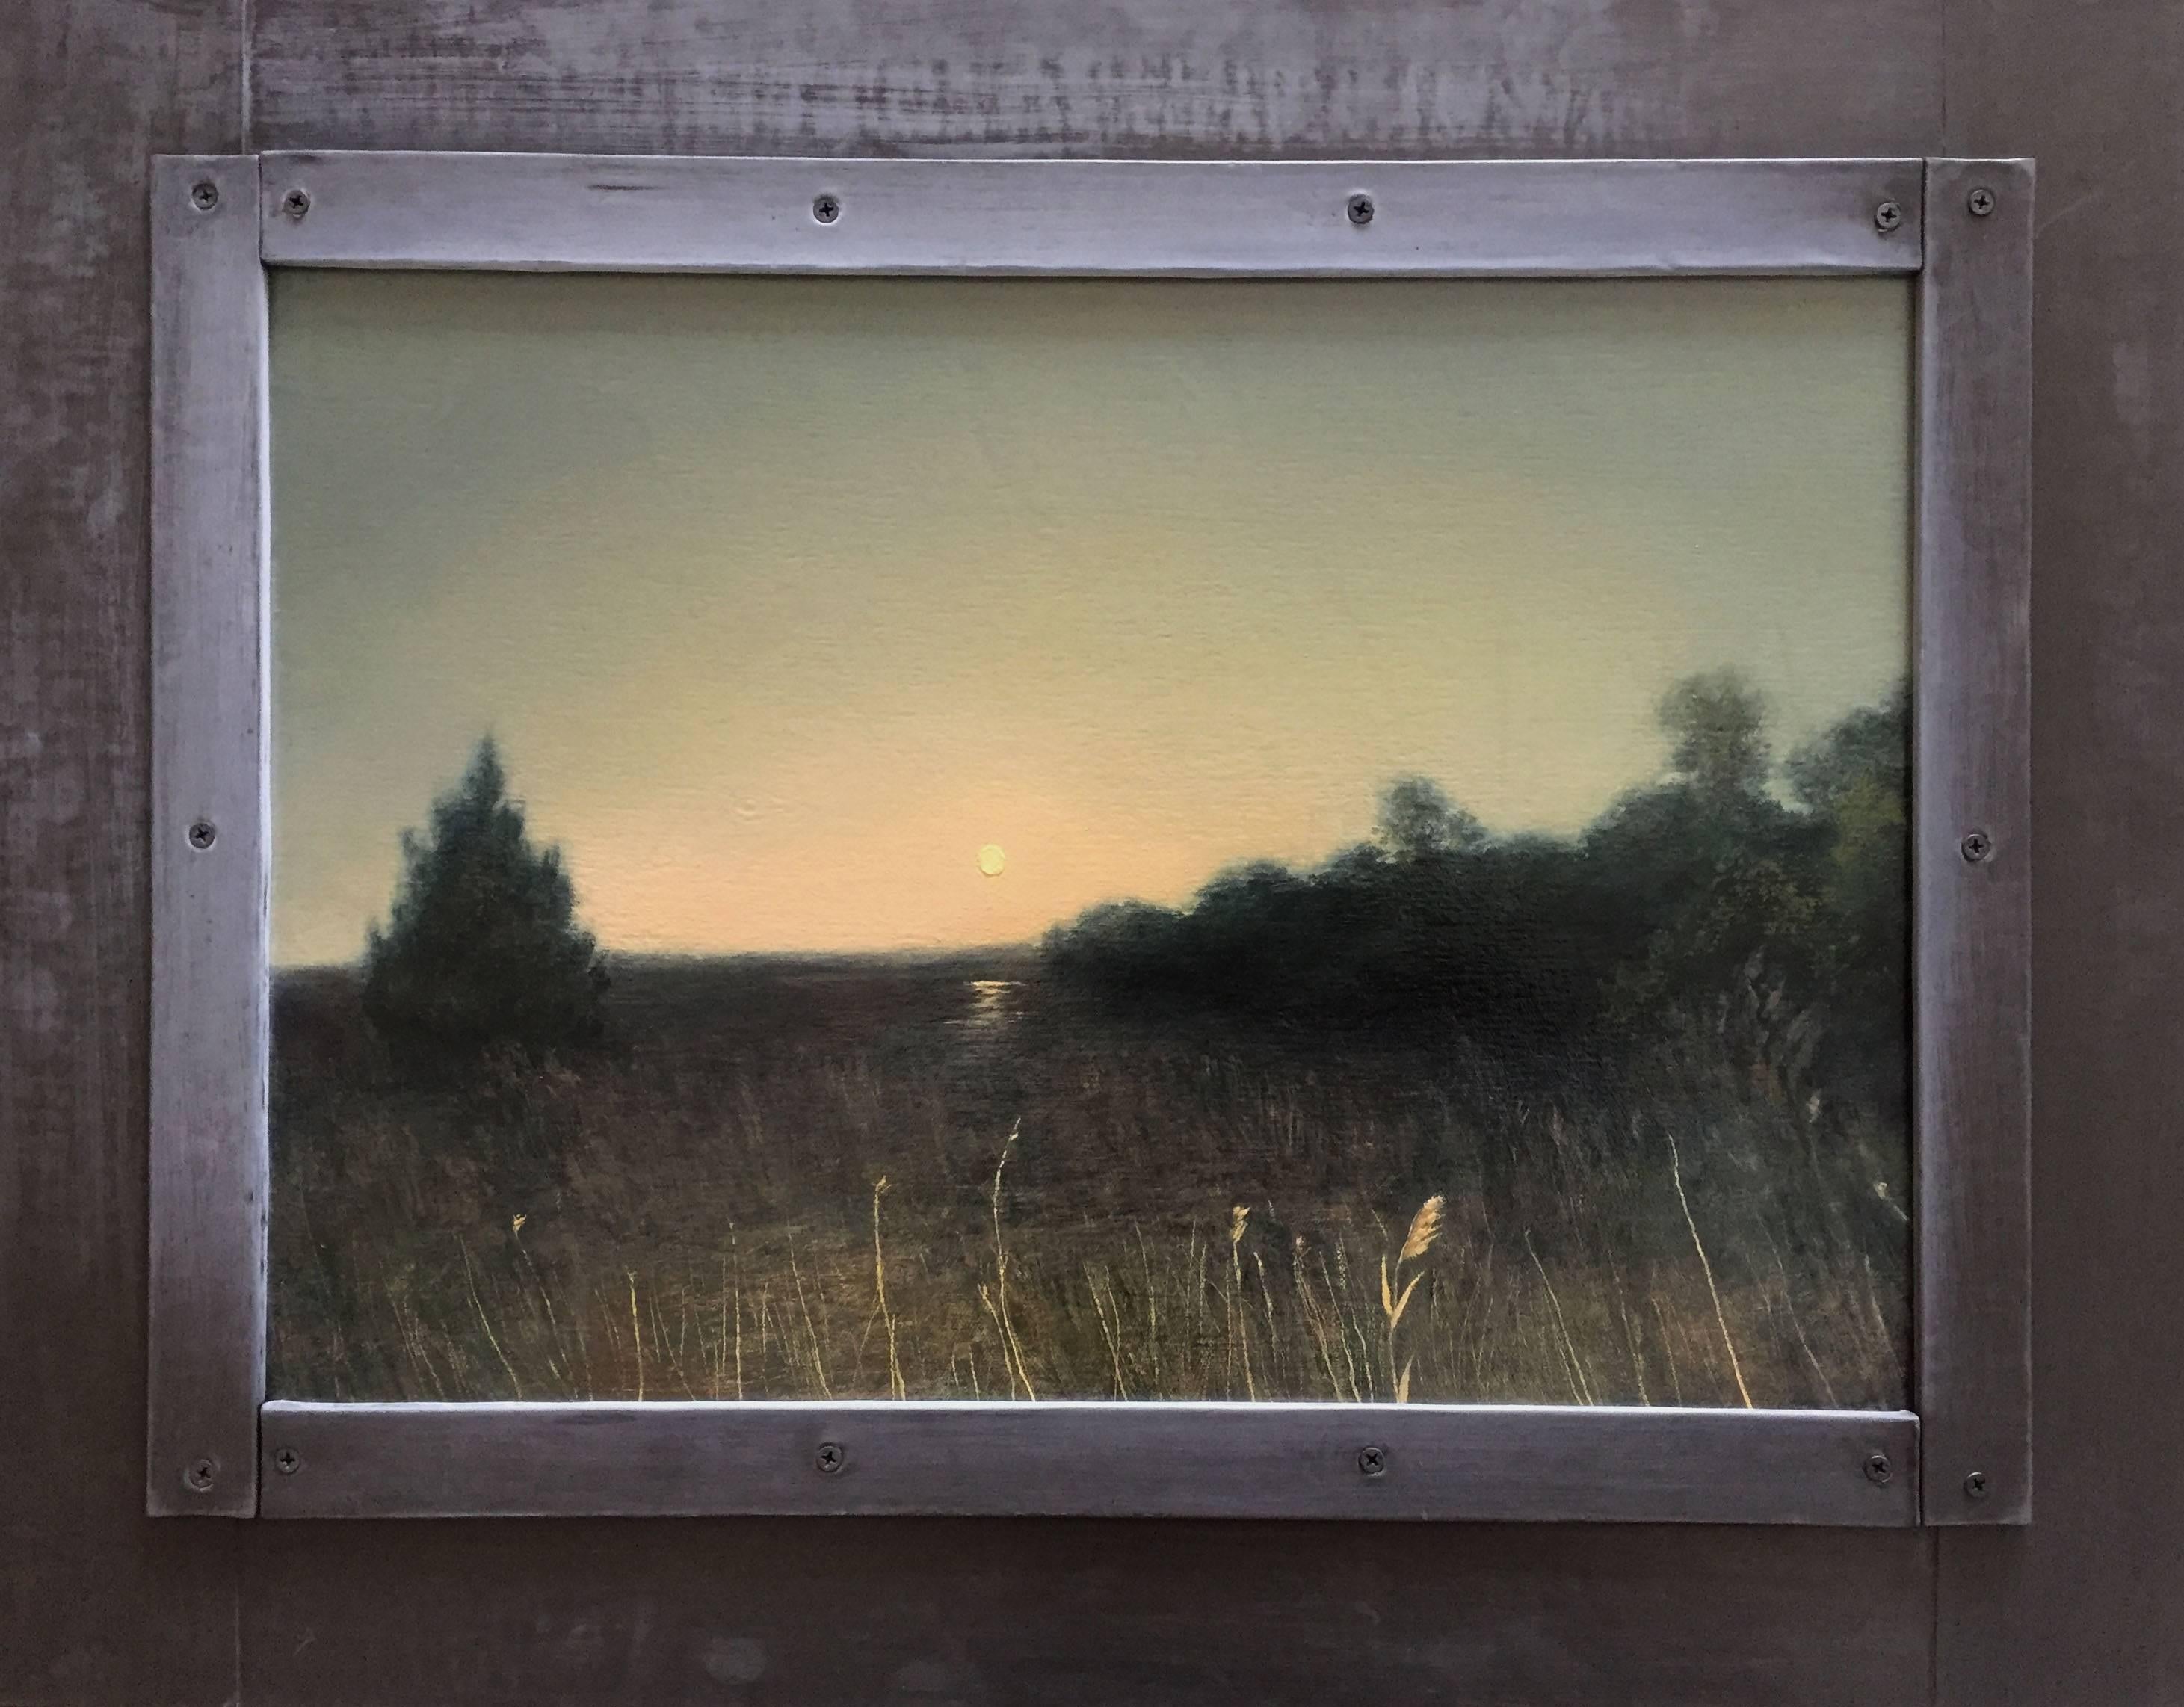 Adam Straus Landscape Painting - Moonrise; Indian Island Park with Lights from Oncoming Cars